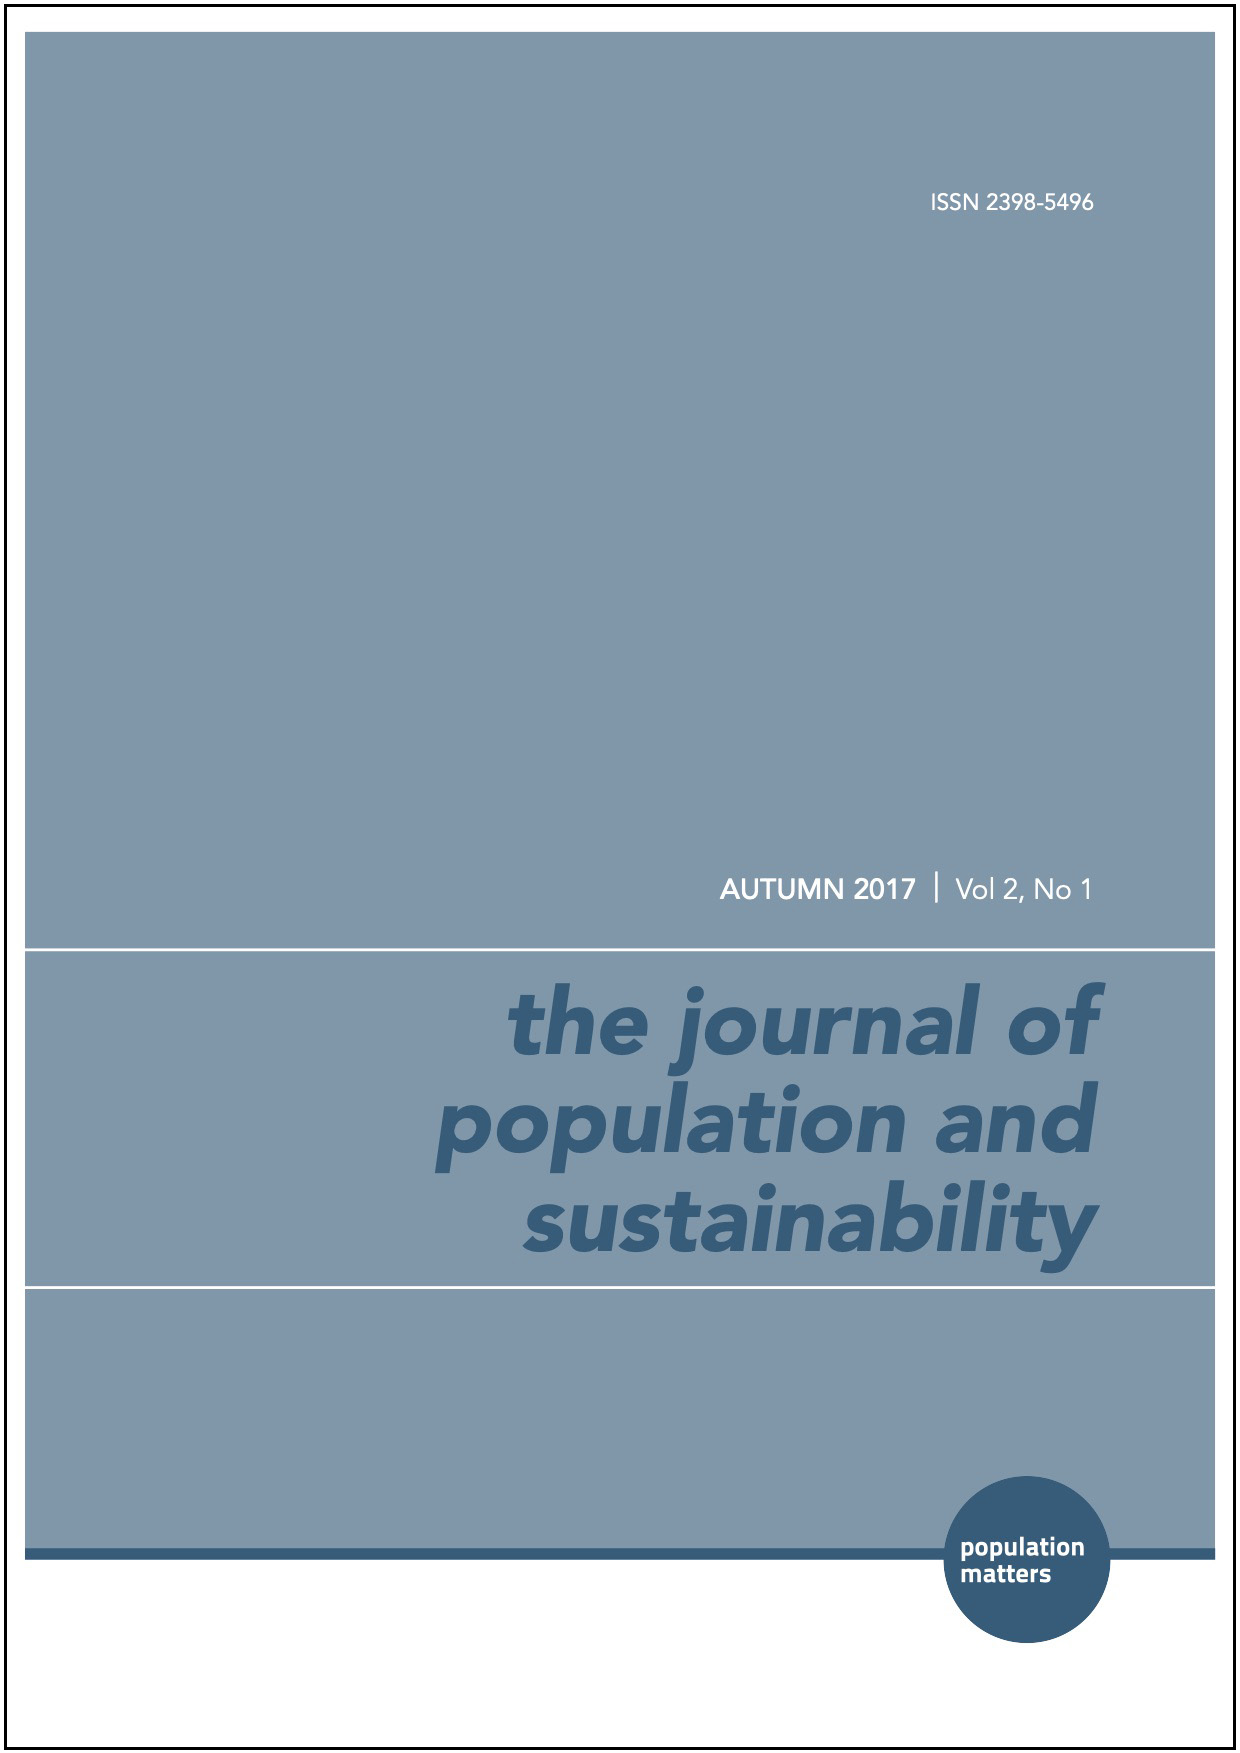 This image of the cover of this issue of The Journal of Population and Sustainability has the title in block letters on a grey-green background.